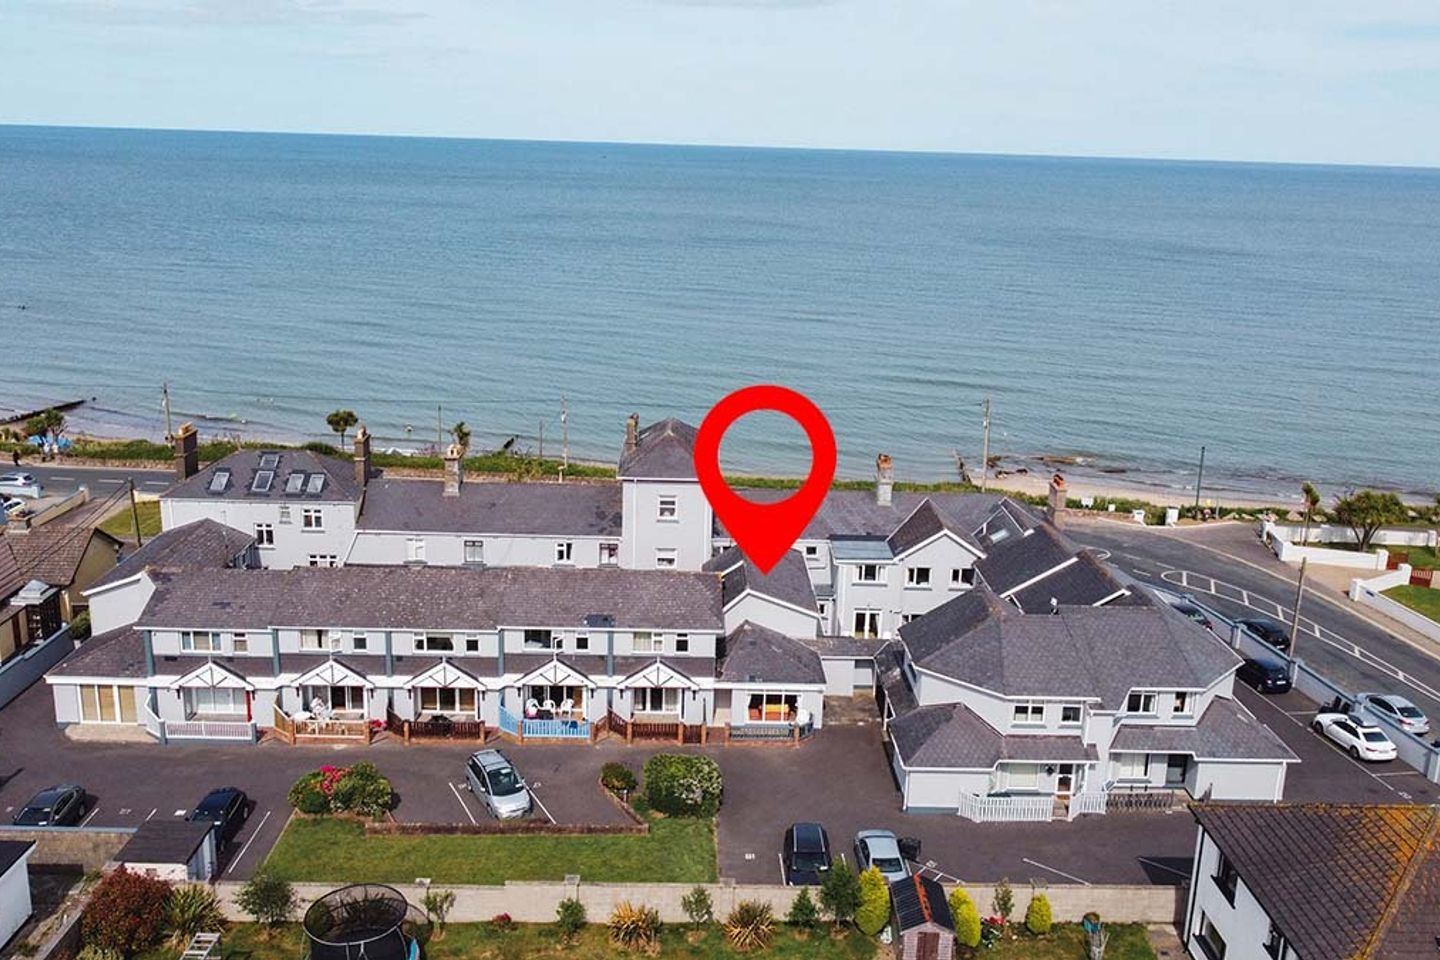 18 Bayview Heights, Rosslare Strand, Co. Wexford